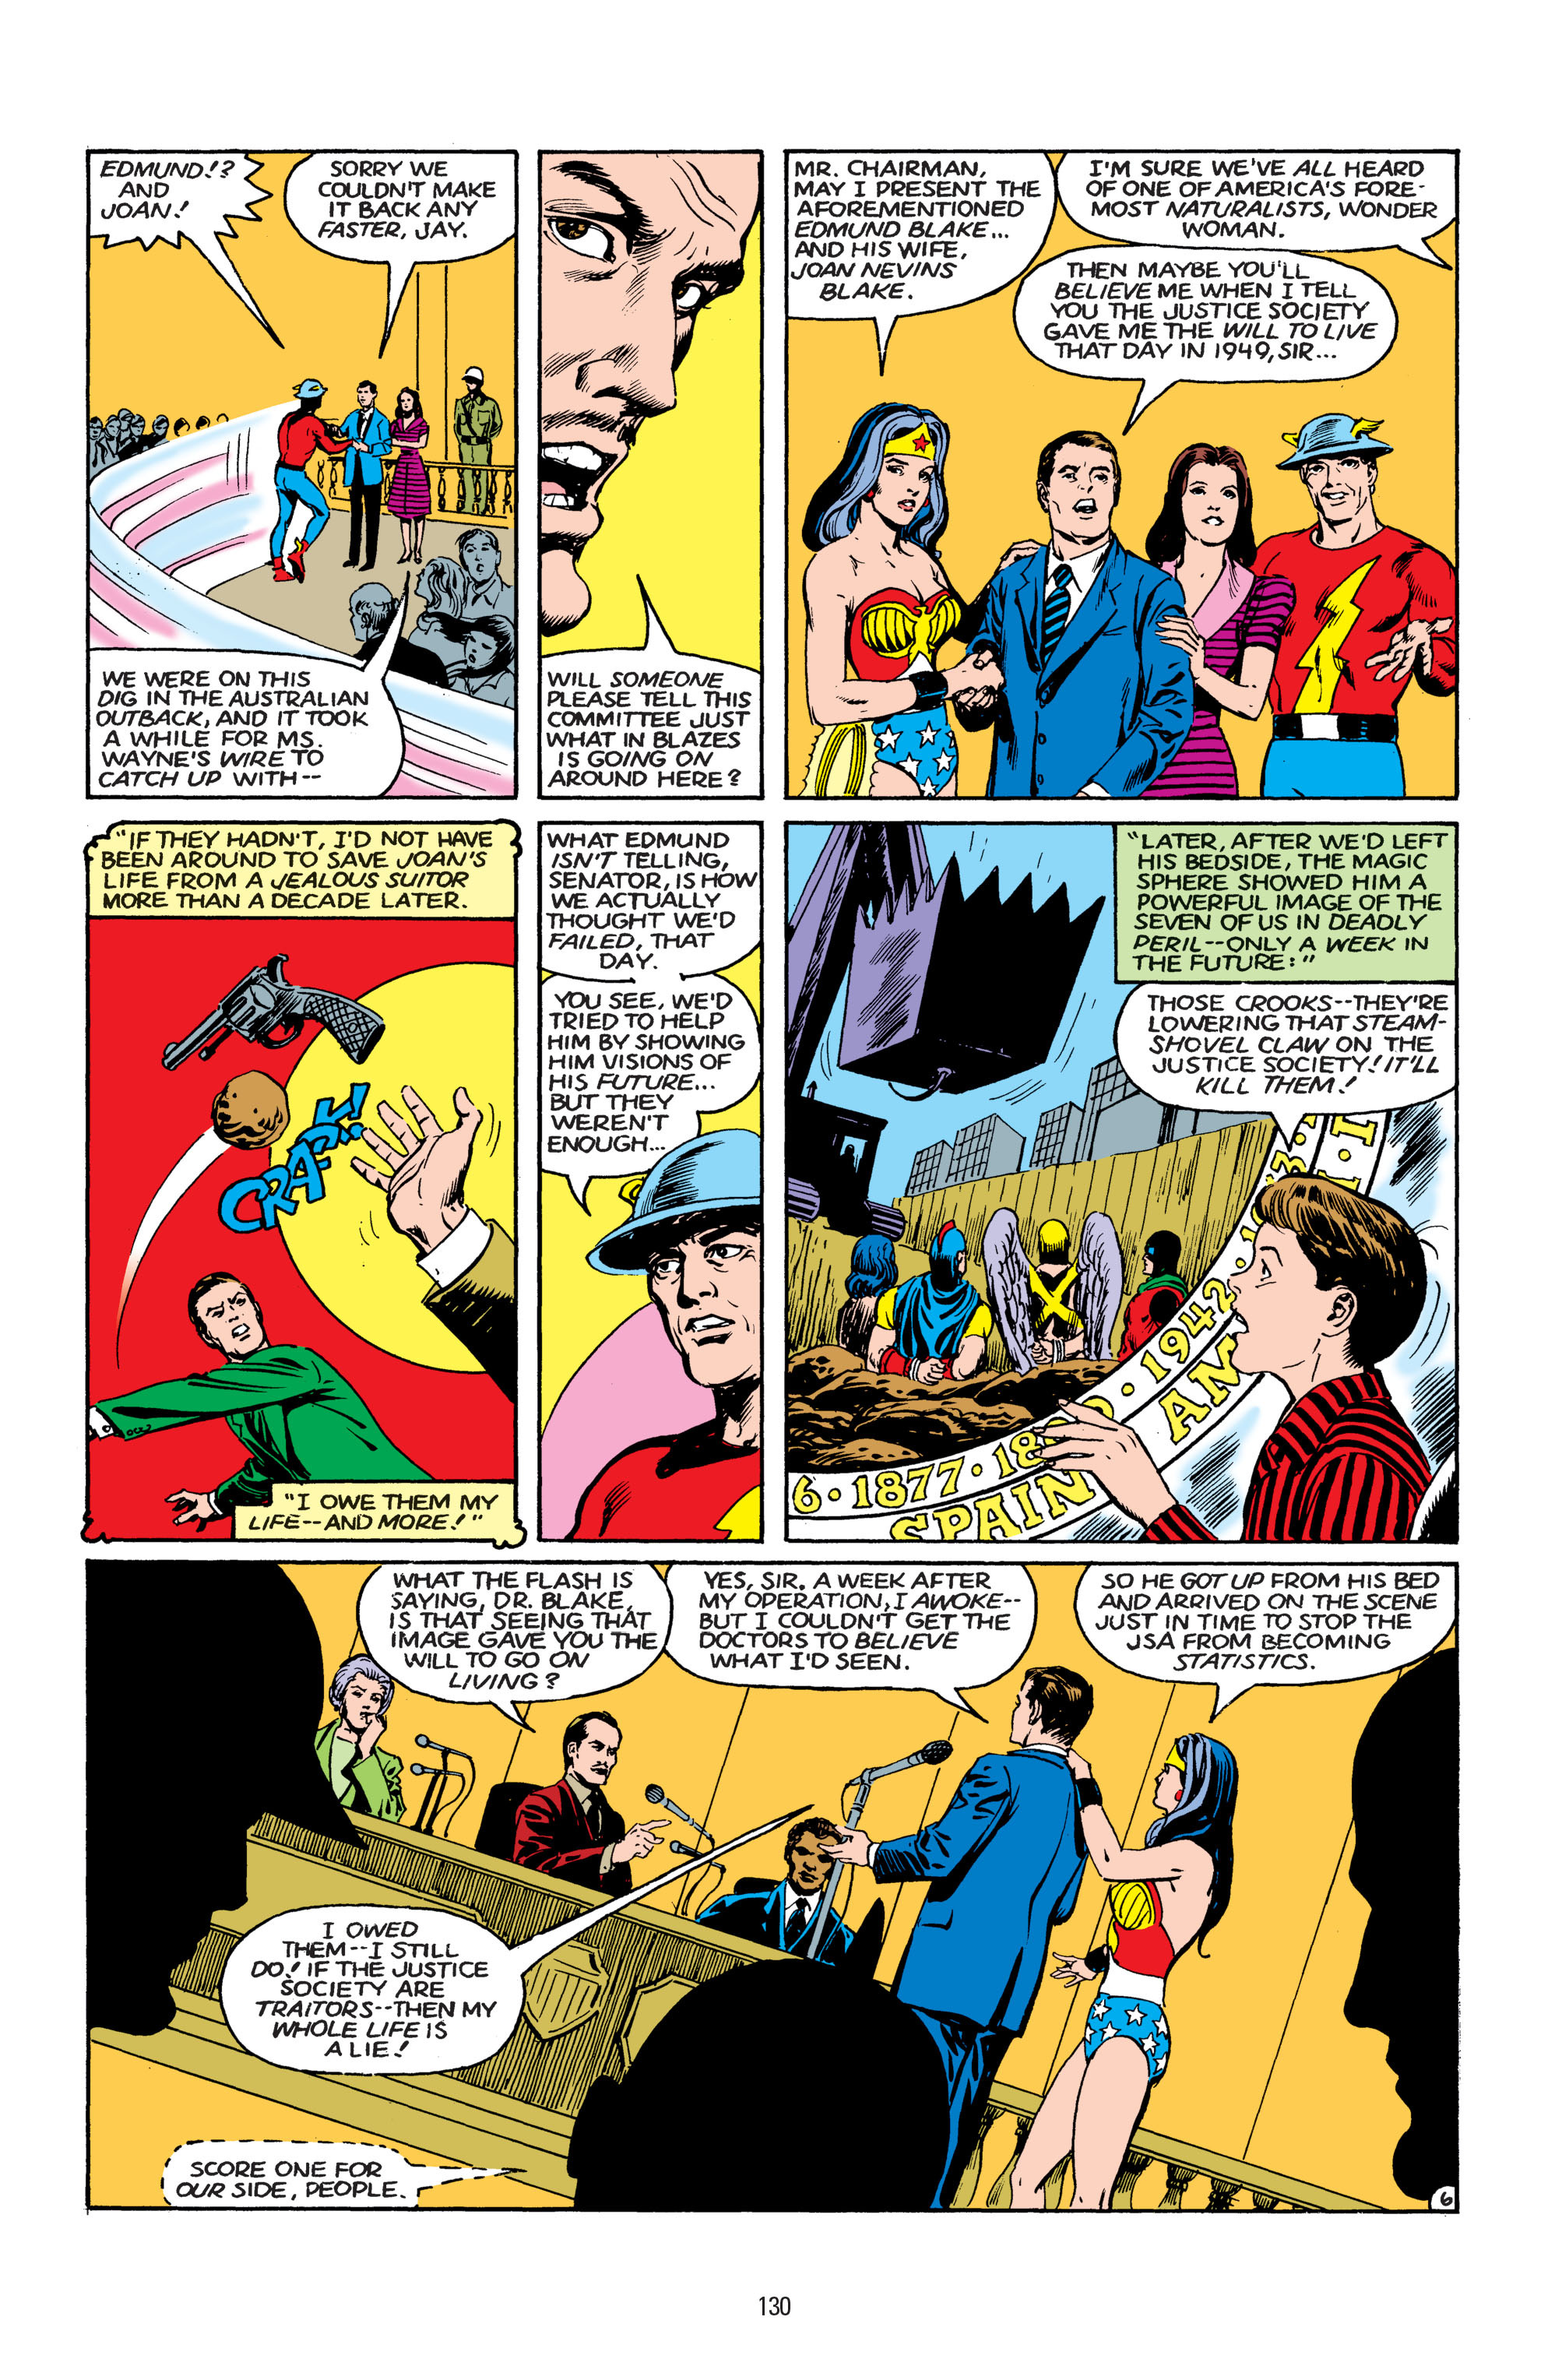 Read online America vs. the Justice Society comic -  Issue # TPB - 124